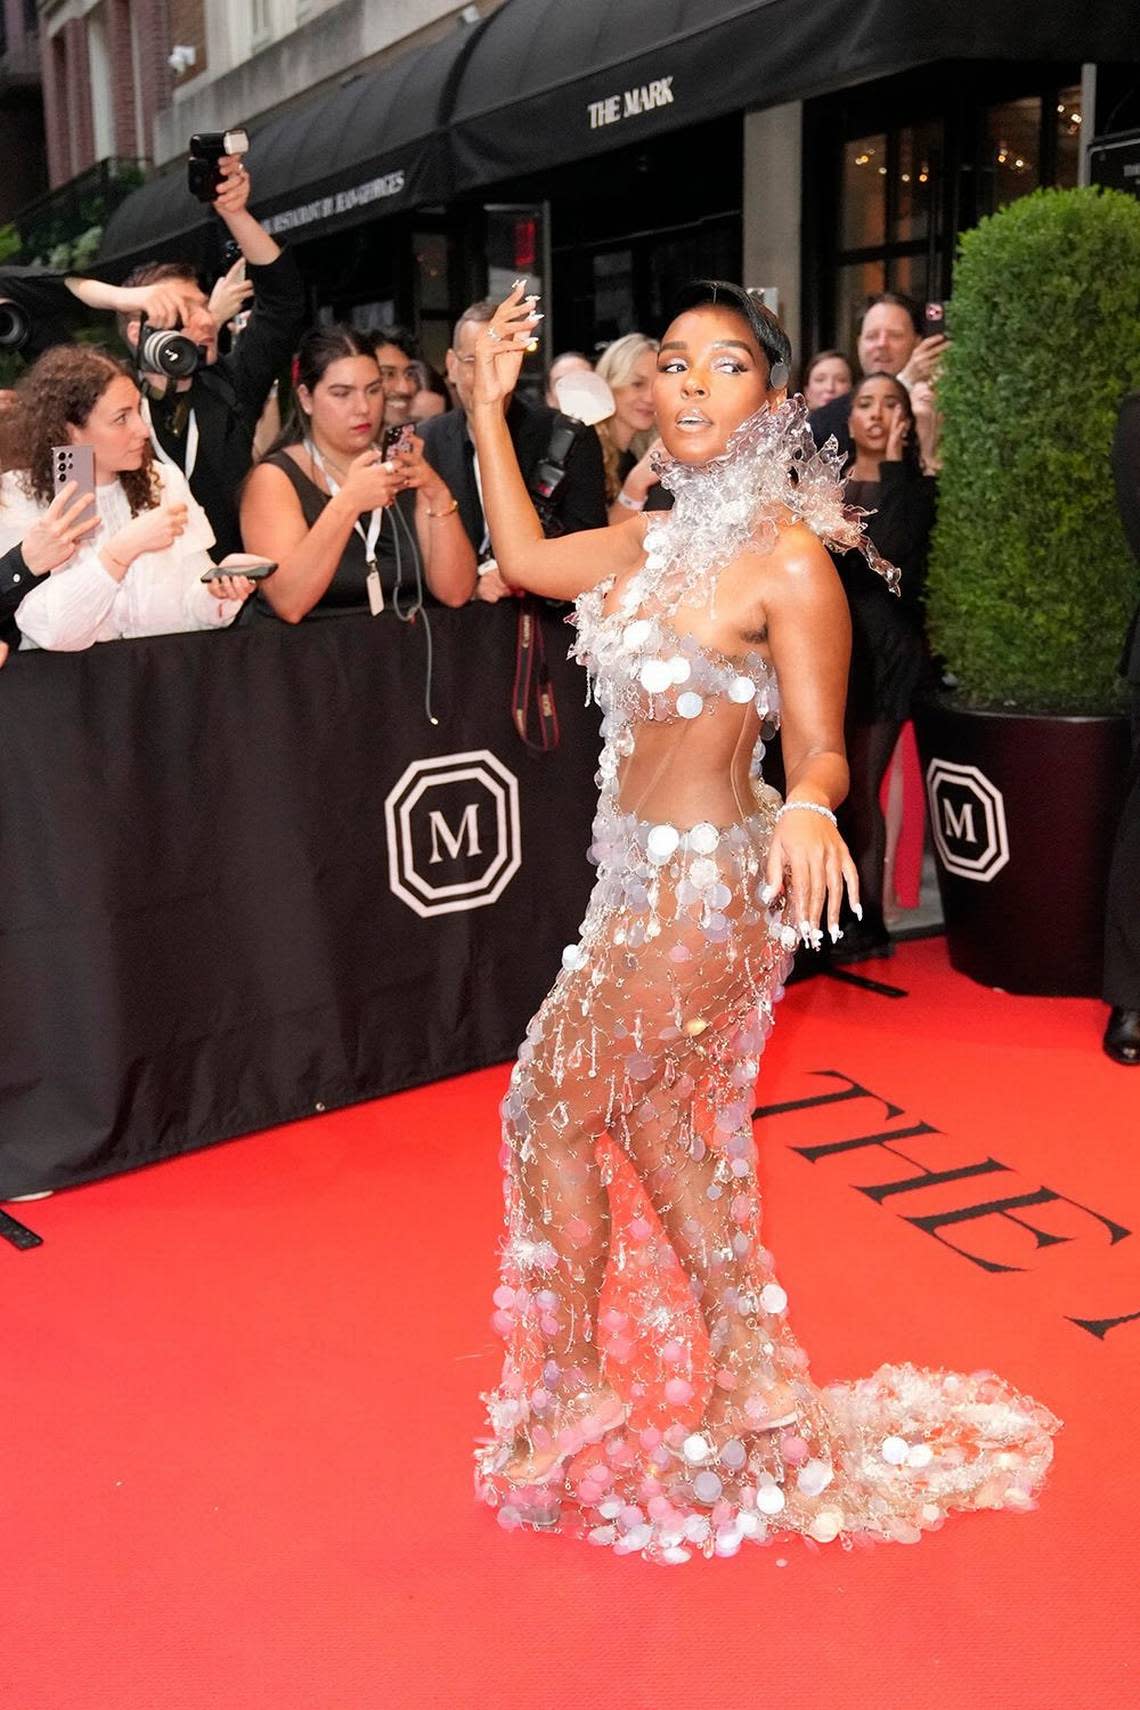 Kansas City, Kansas native Janelle Monáe, wearing a Vera Wang gown, leaves The Mark Hotel in New York City for the Met Gala Monday.